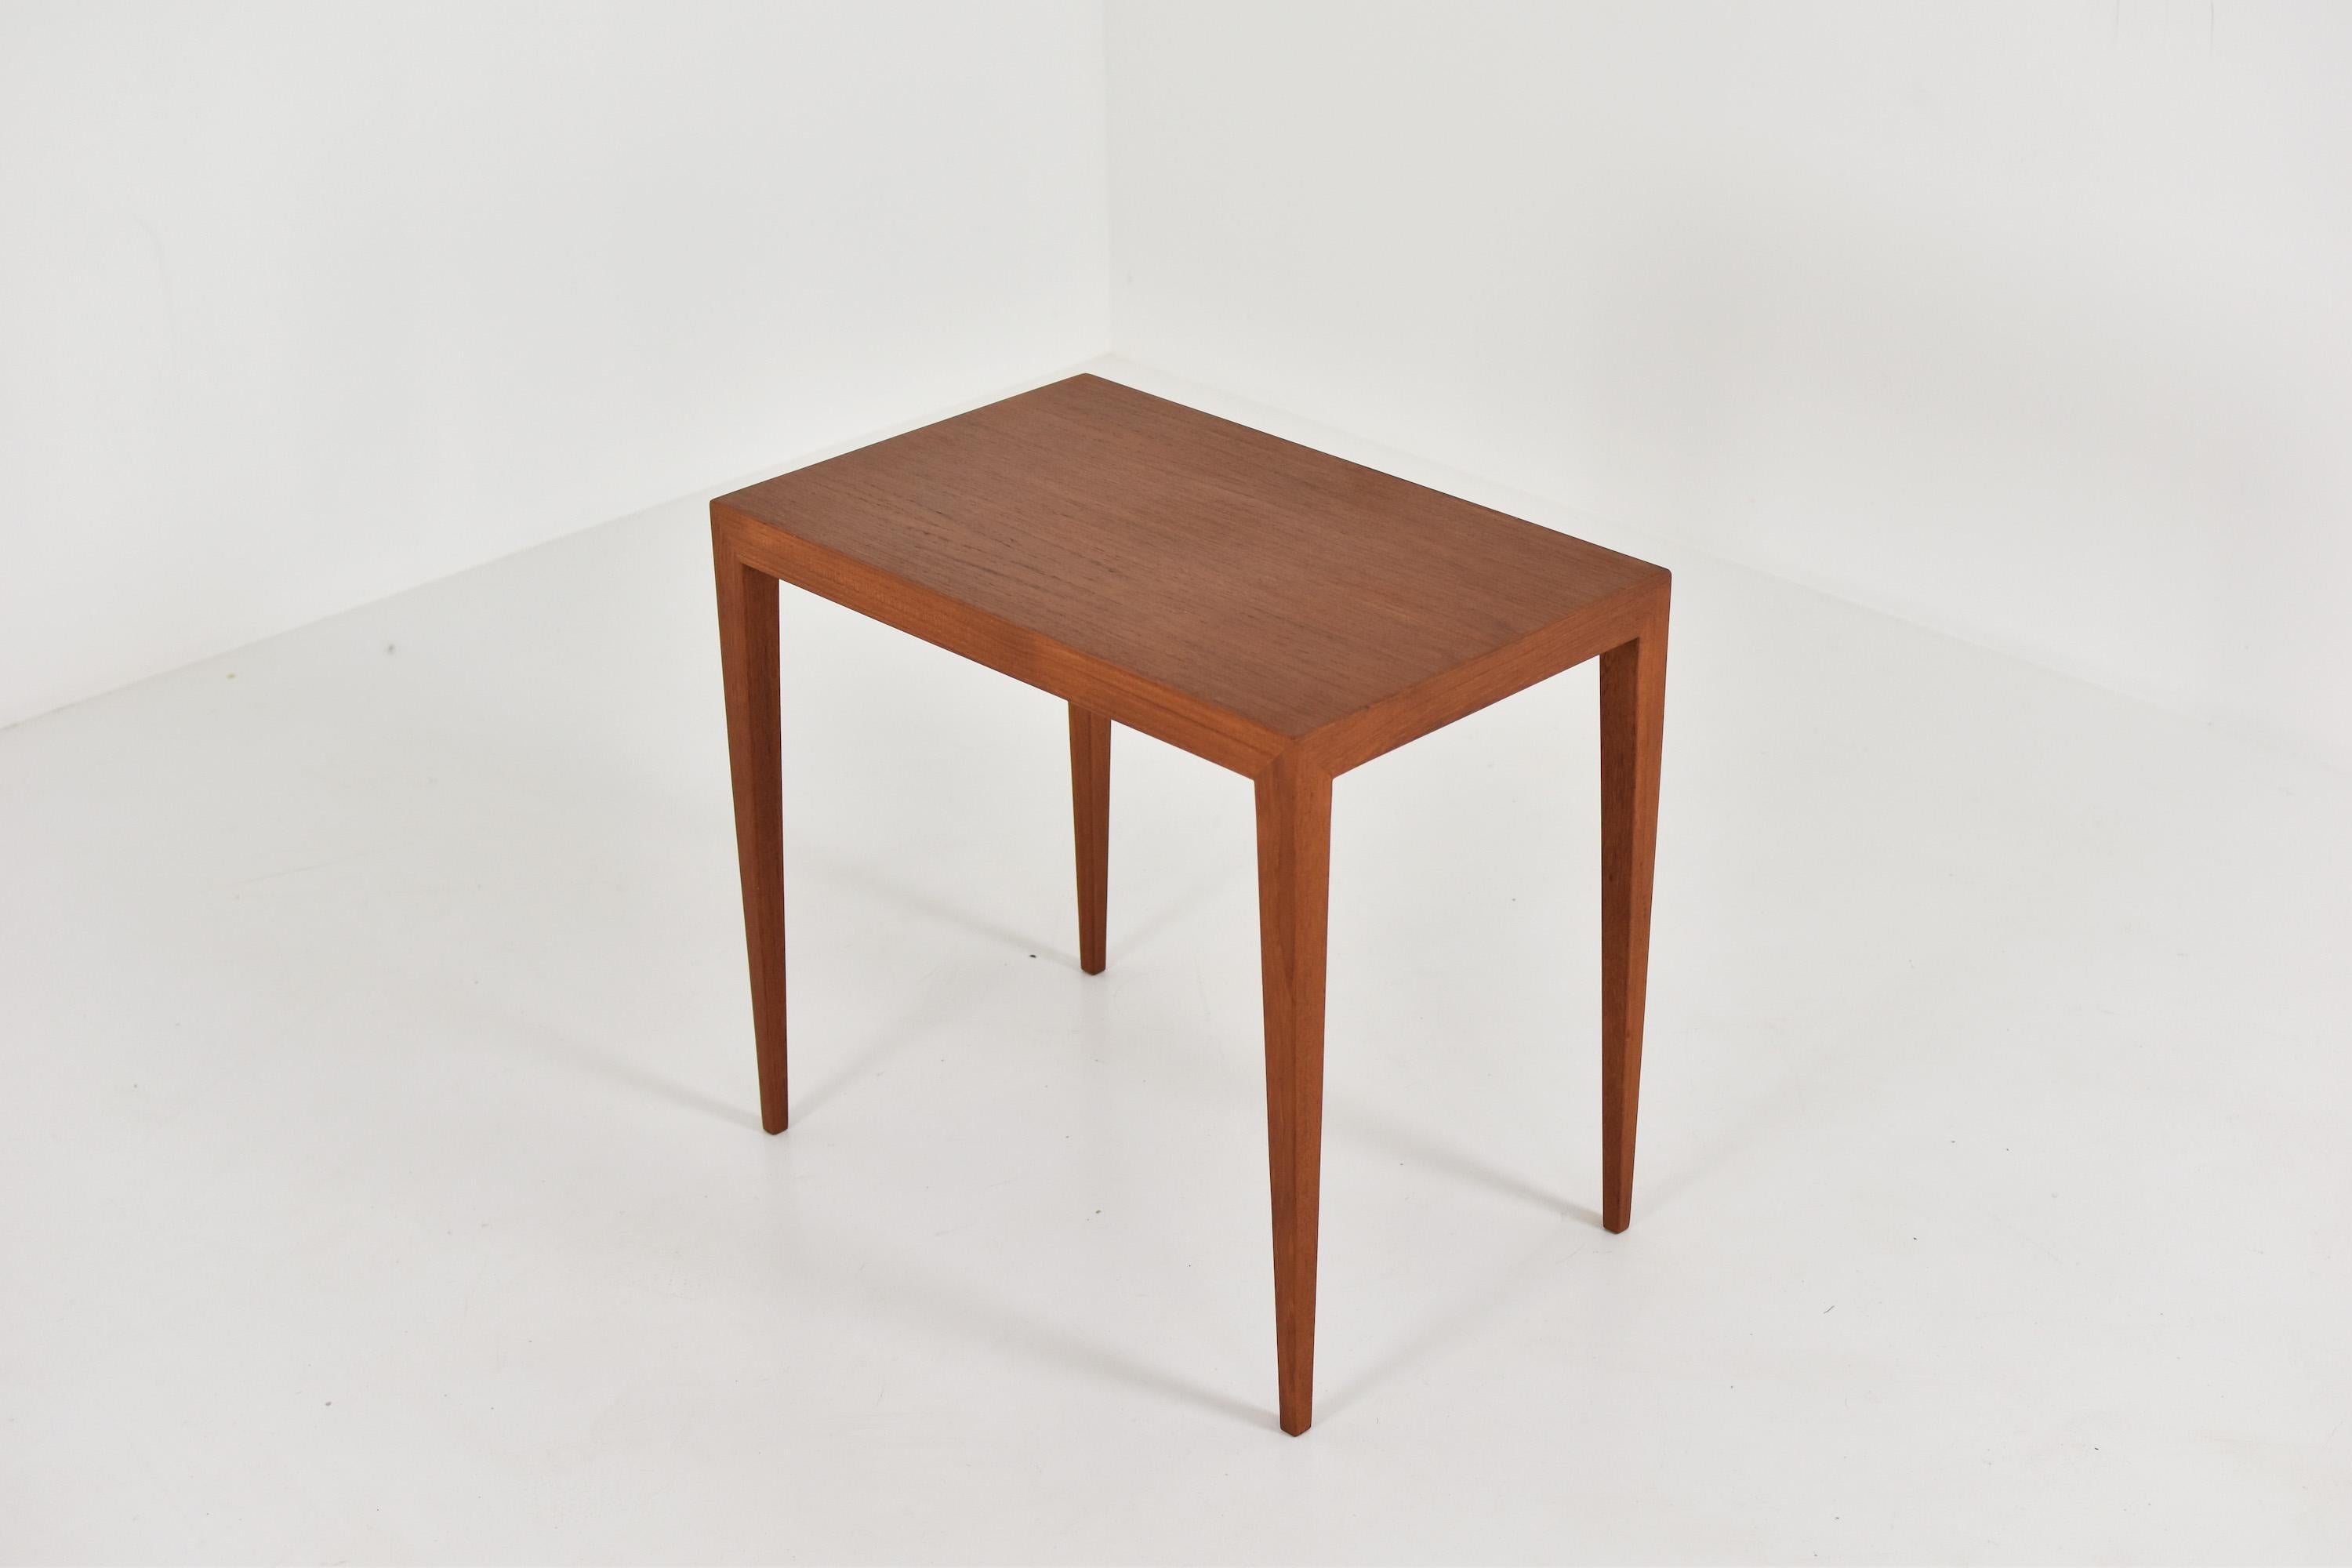 Elegant nesting table by Severin Hansen for Haslev Møbelfabrik, Denmark, 1950s. This side table is made out of teak and restored with love. Great example of high-end Scandinavian craftsmanship.

Measurements:
H 52 x W 56.5 x 36.5 cm.